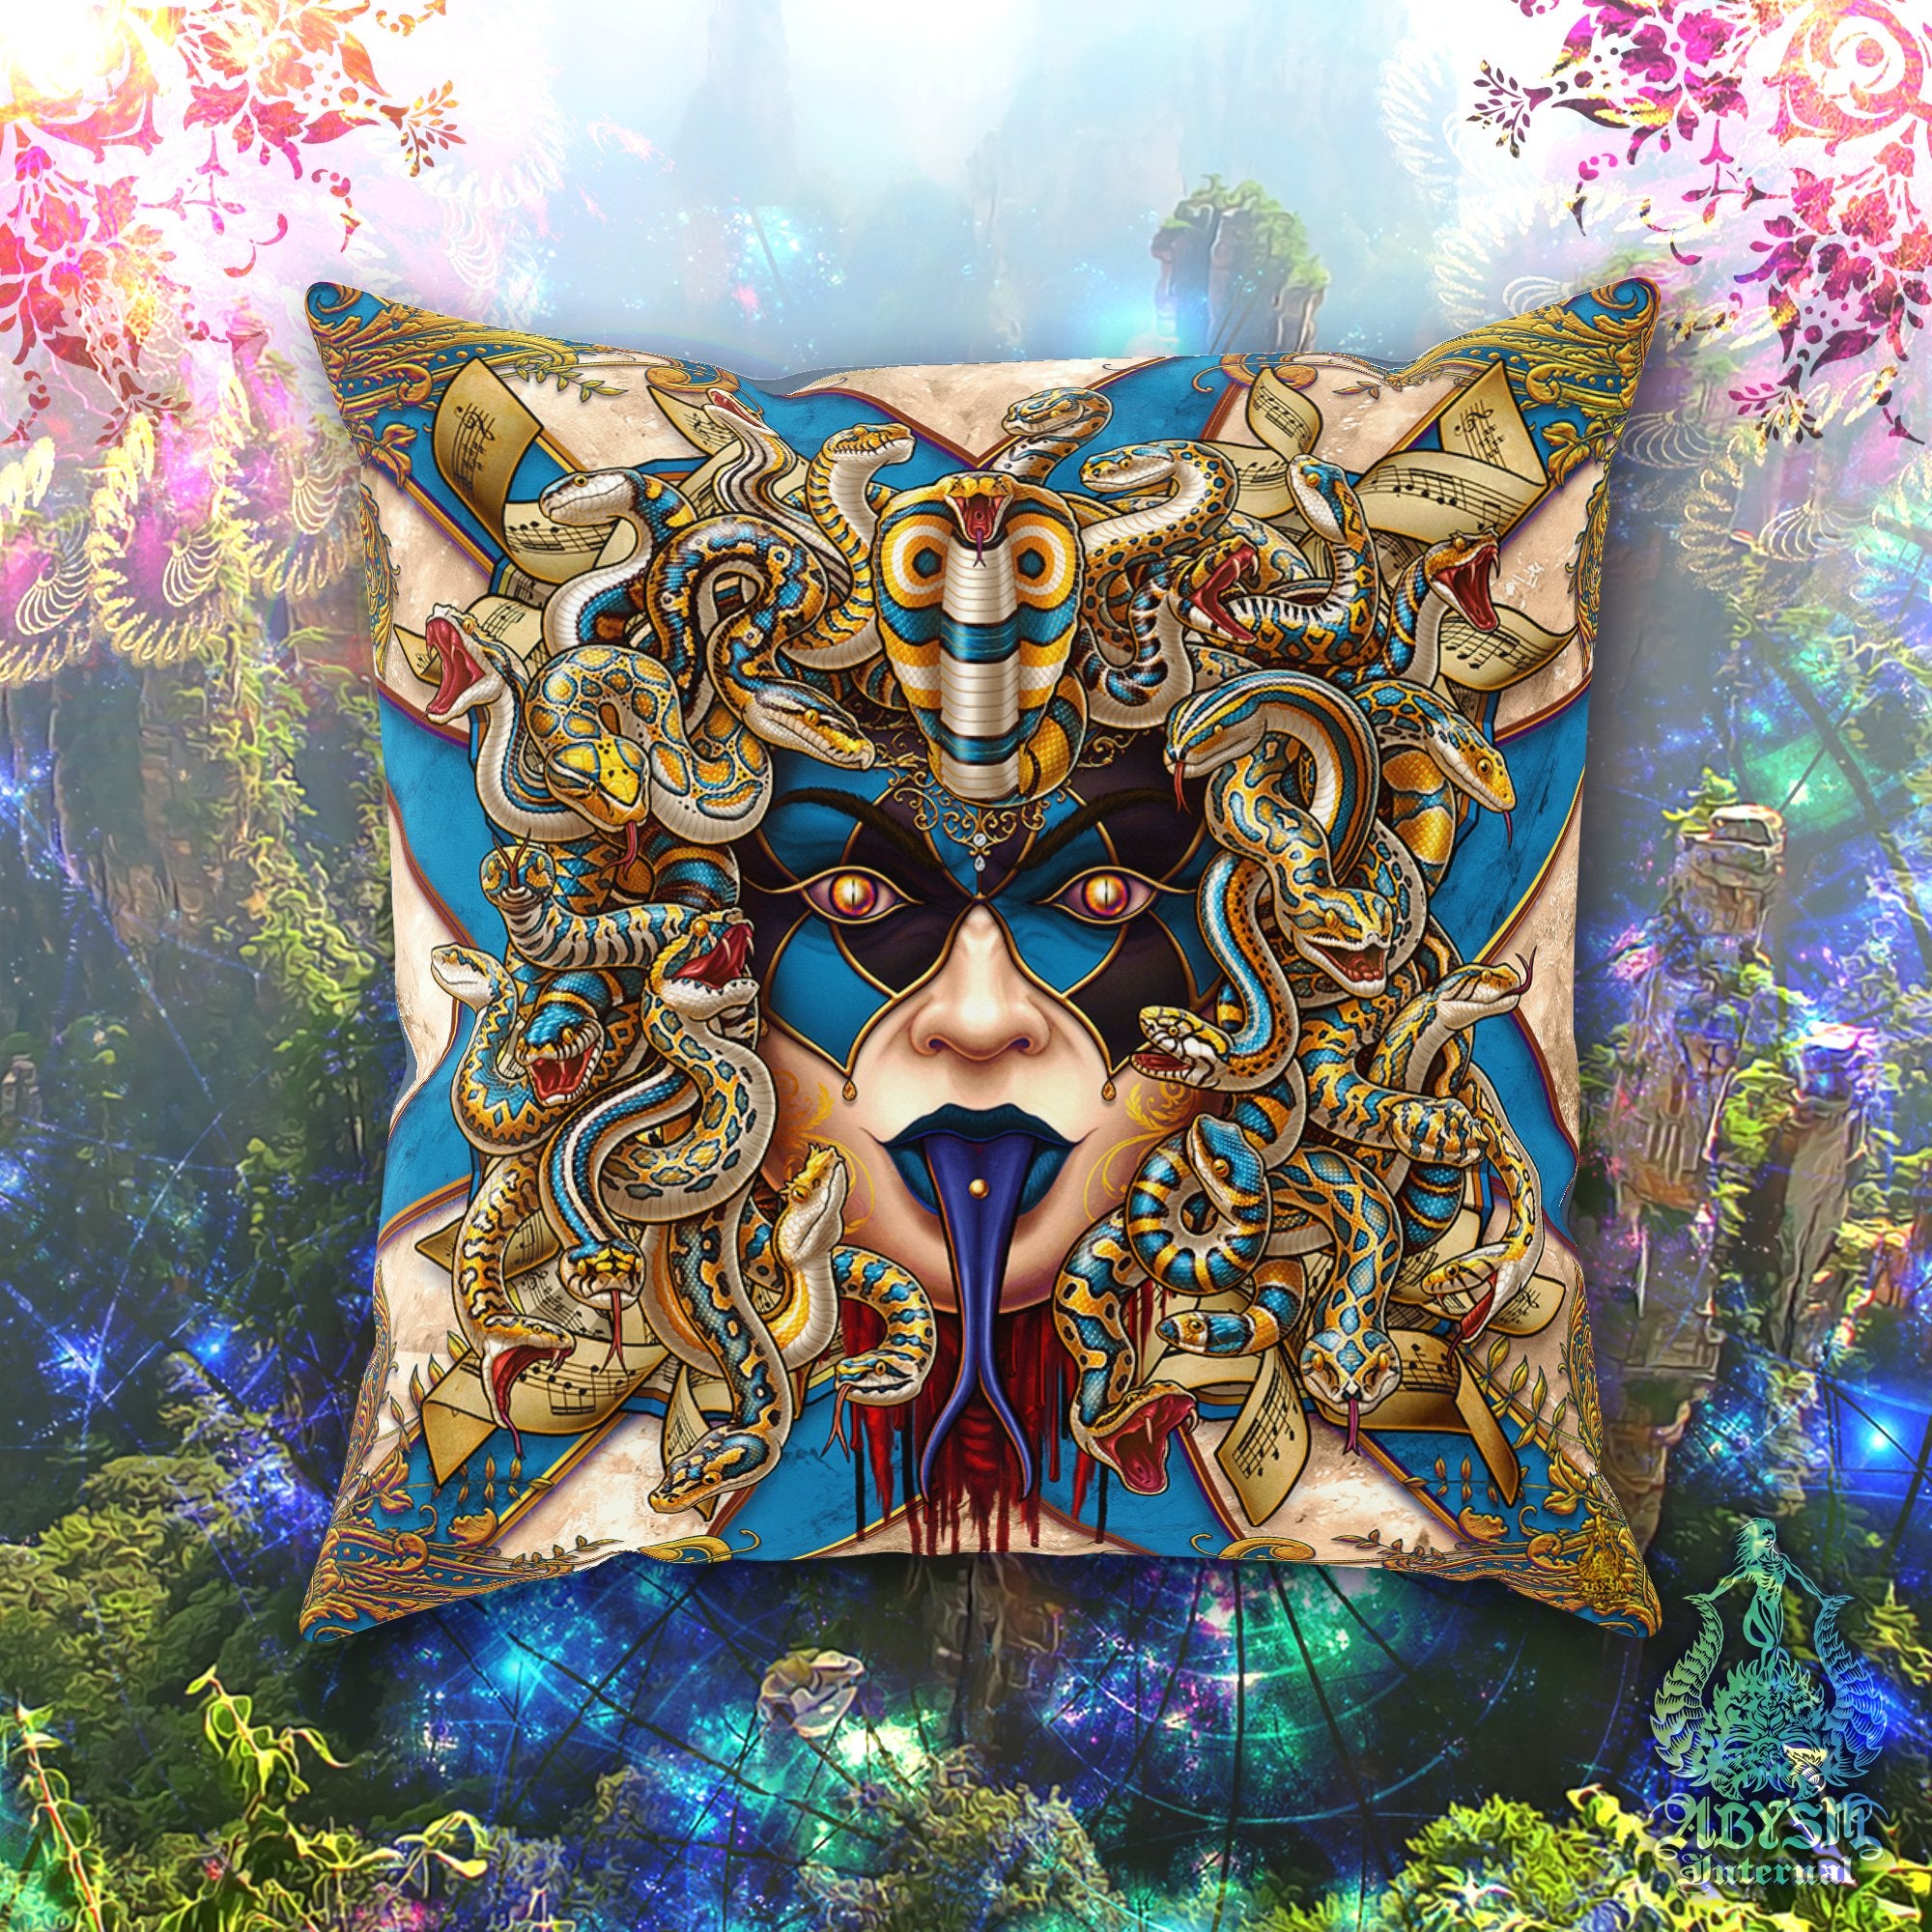 Medusa Throw Pillow, Decorative Accent Pillow, Square Cushion Cover, Gamer Room Decor, Ecclectic Home - Harlequin, 4 Faces, 7 Colors - Abysm Internal